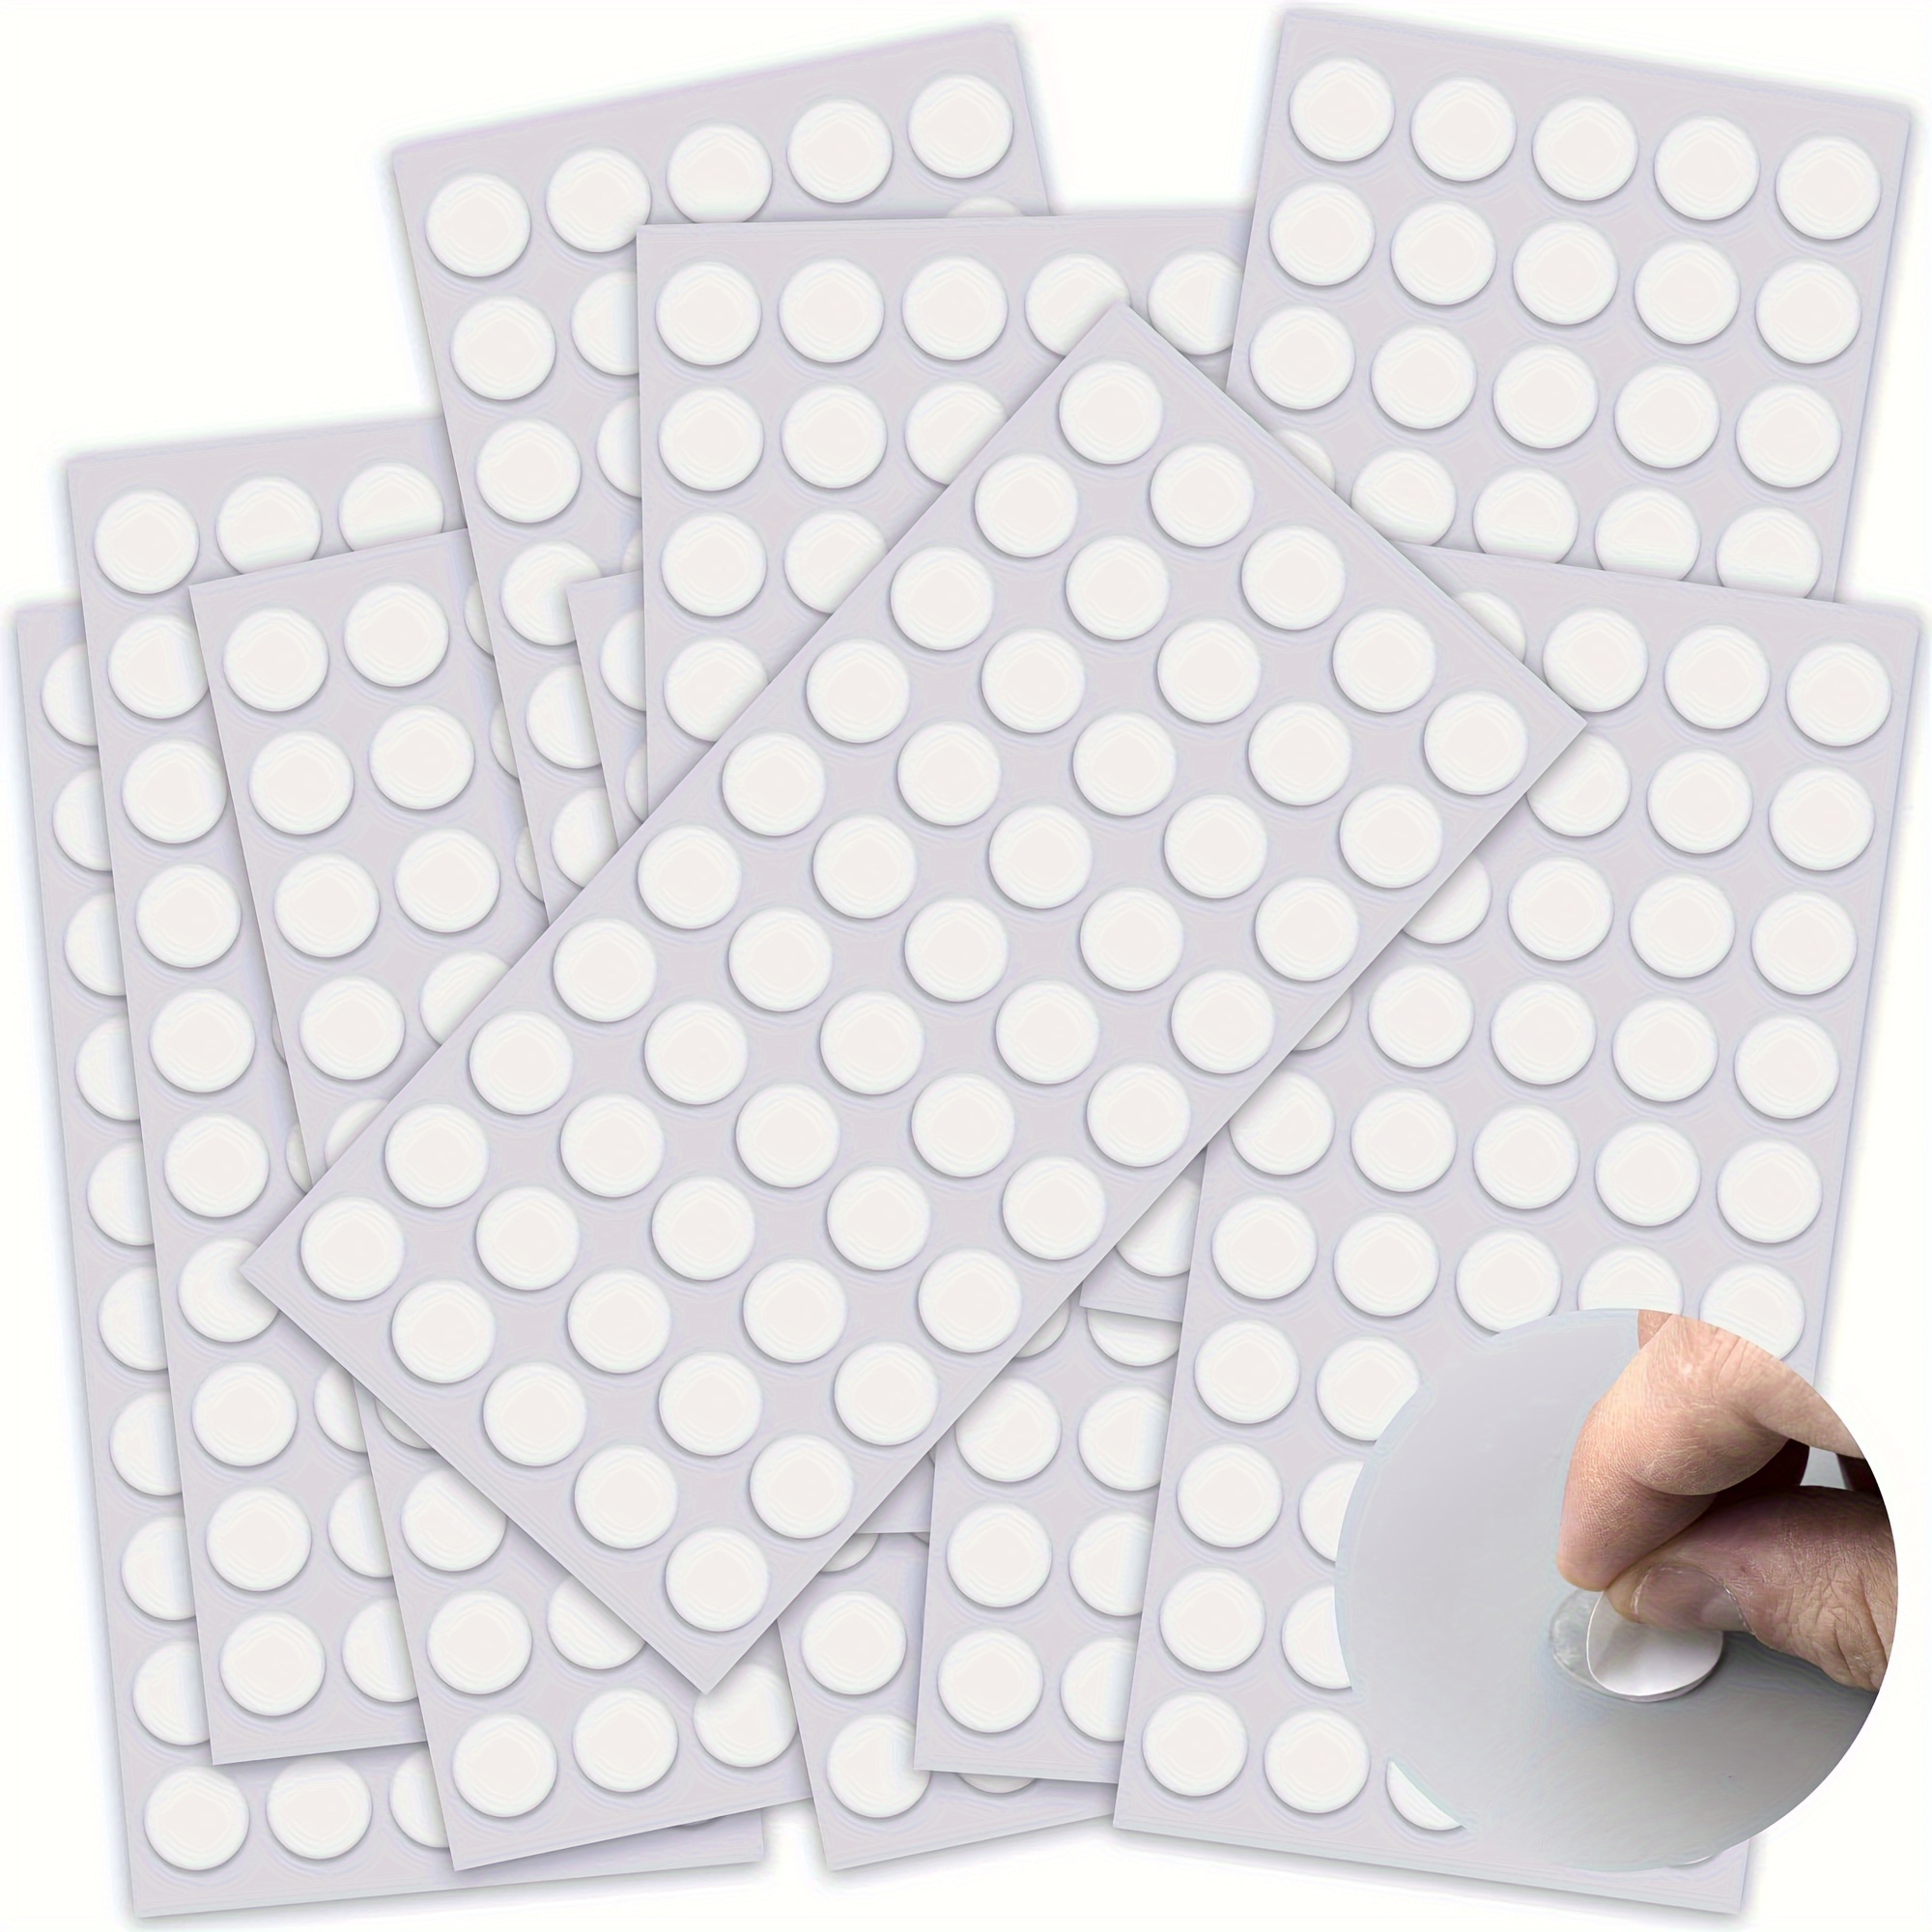 200Pcs Round Double Sided Adhesive Tape Dots Clear Removable